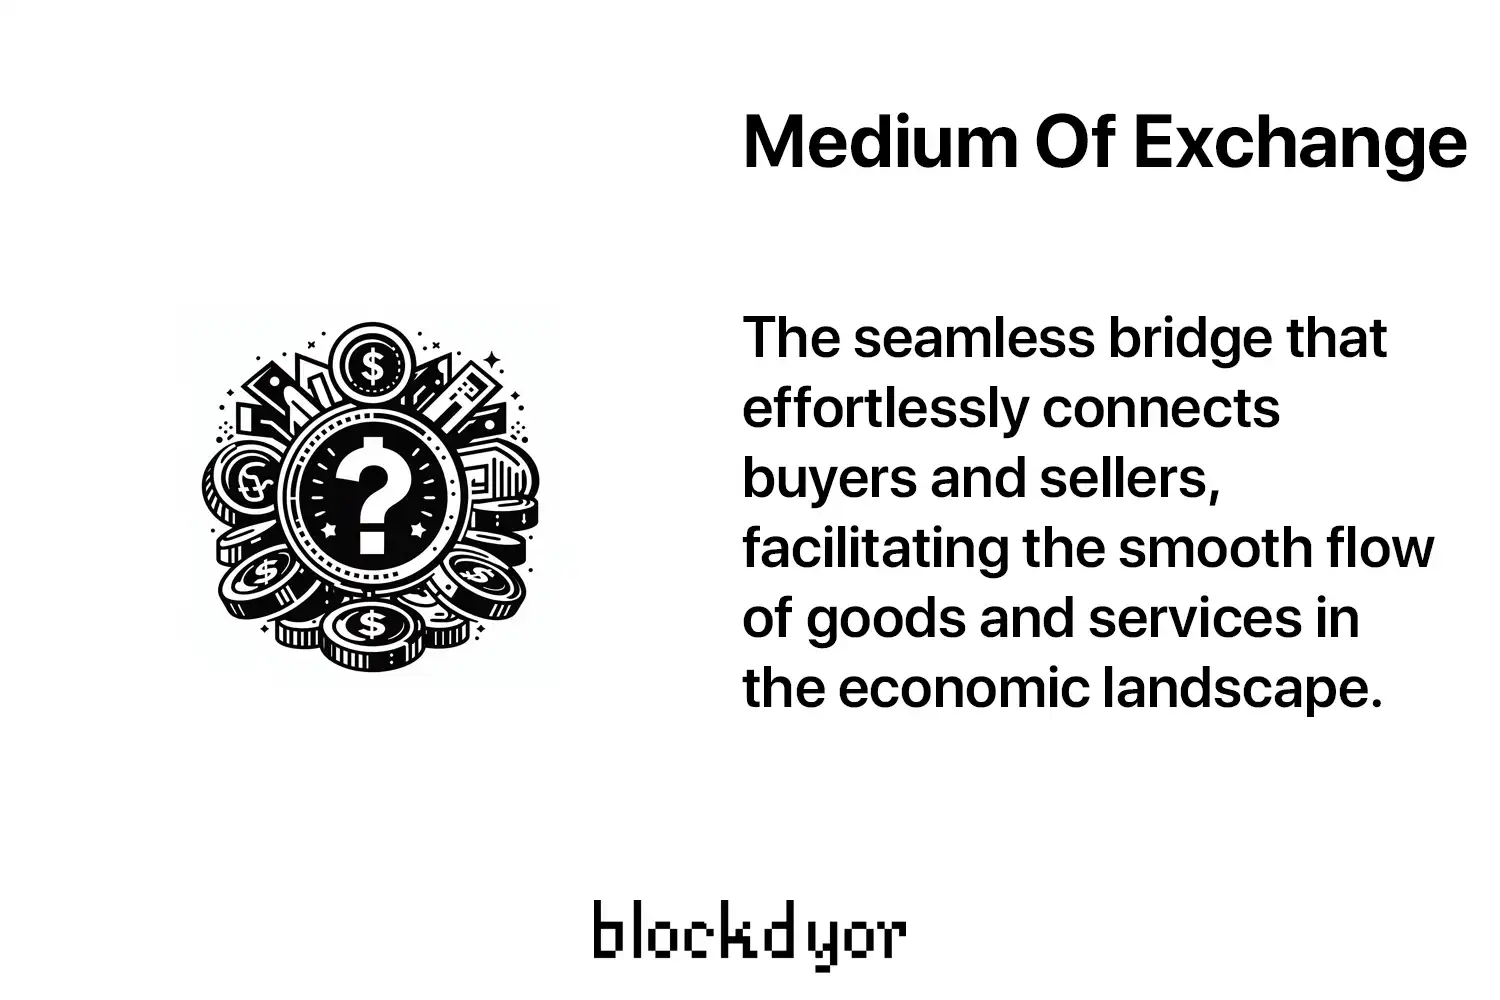 Medium Of Exchange: What It Is And How It Works